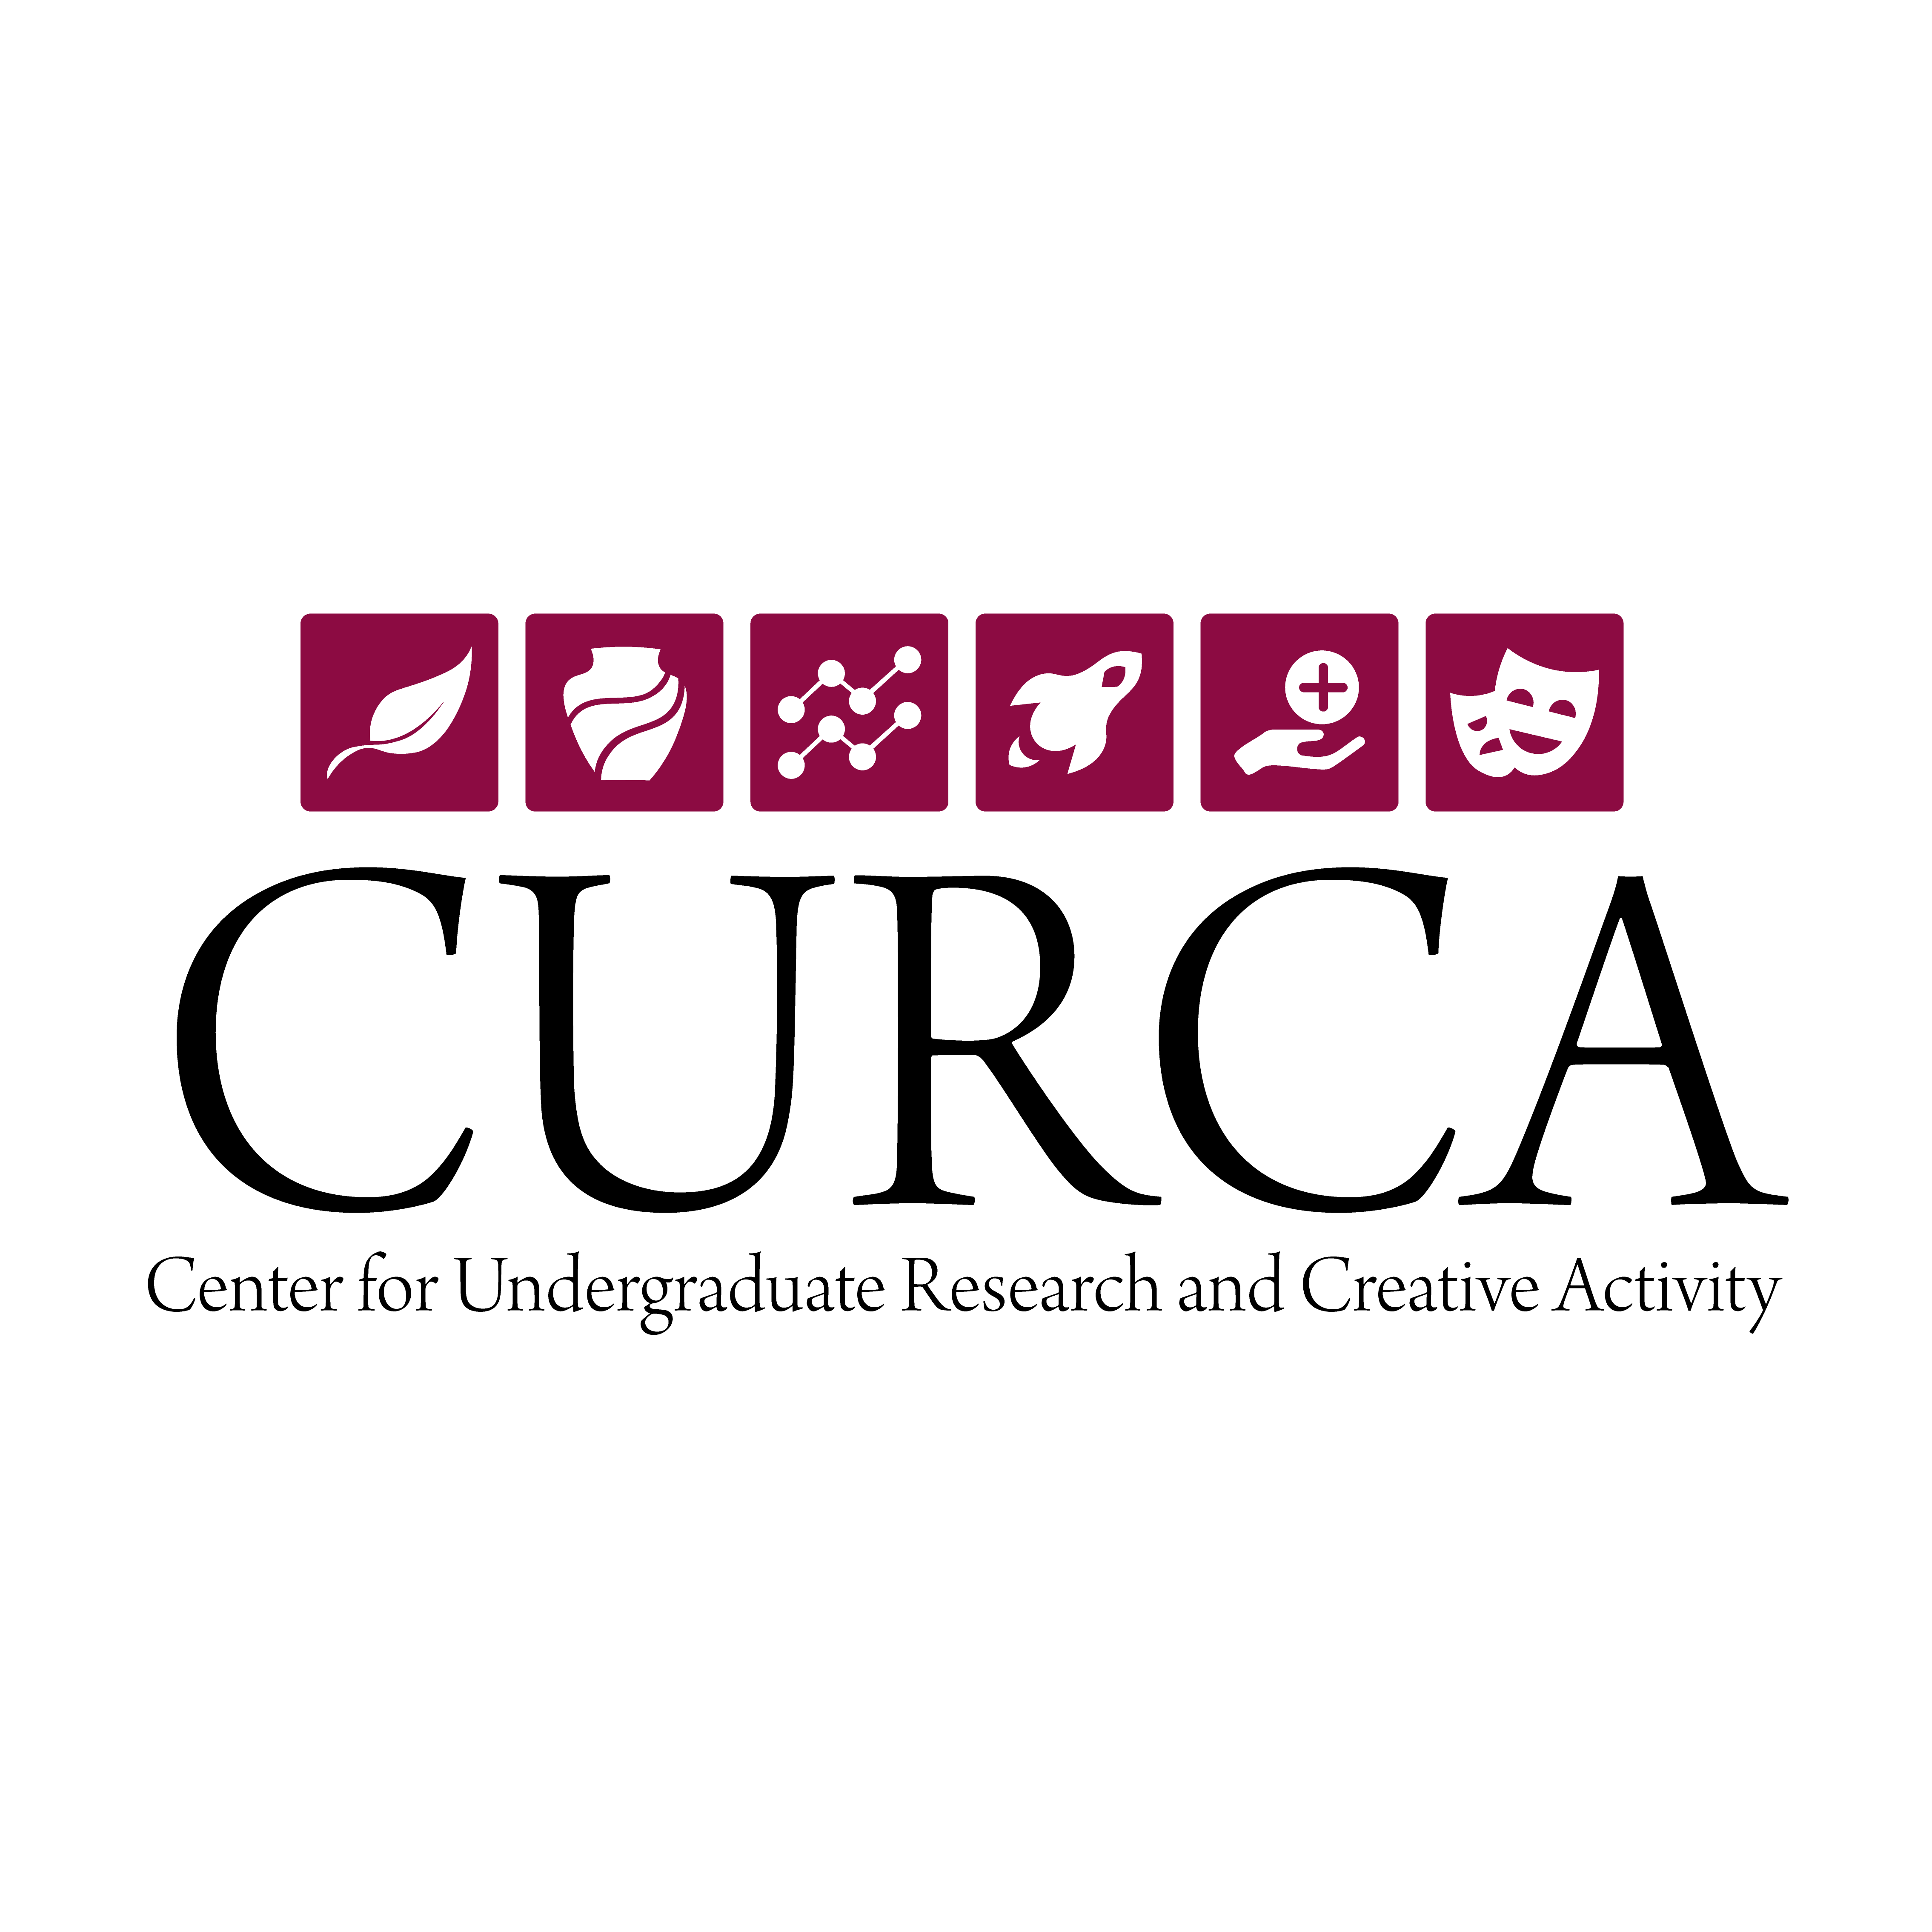 Center for Undergraduate Research and Creative Activity Logo